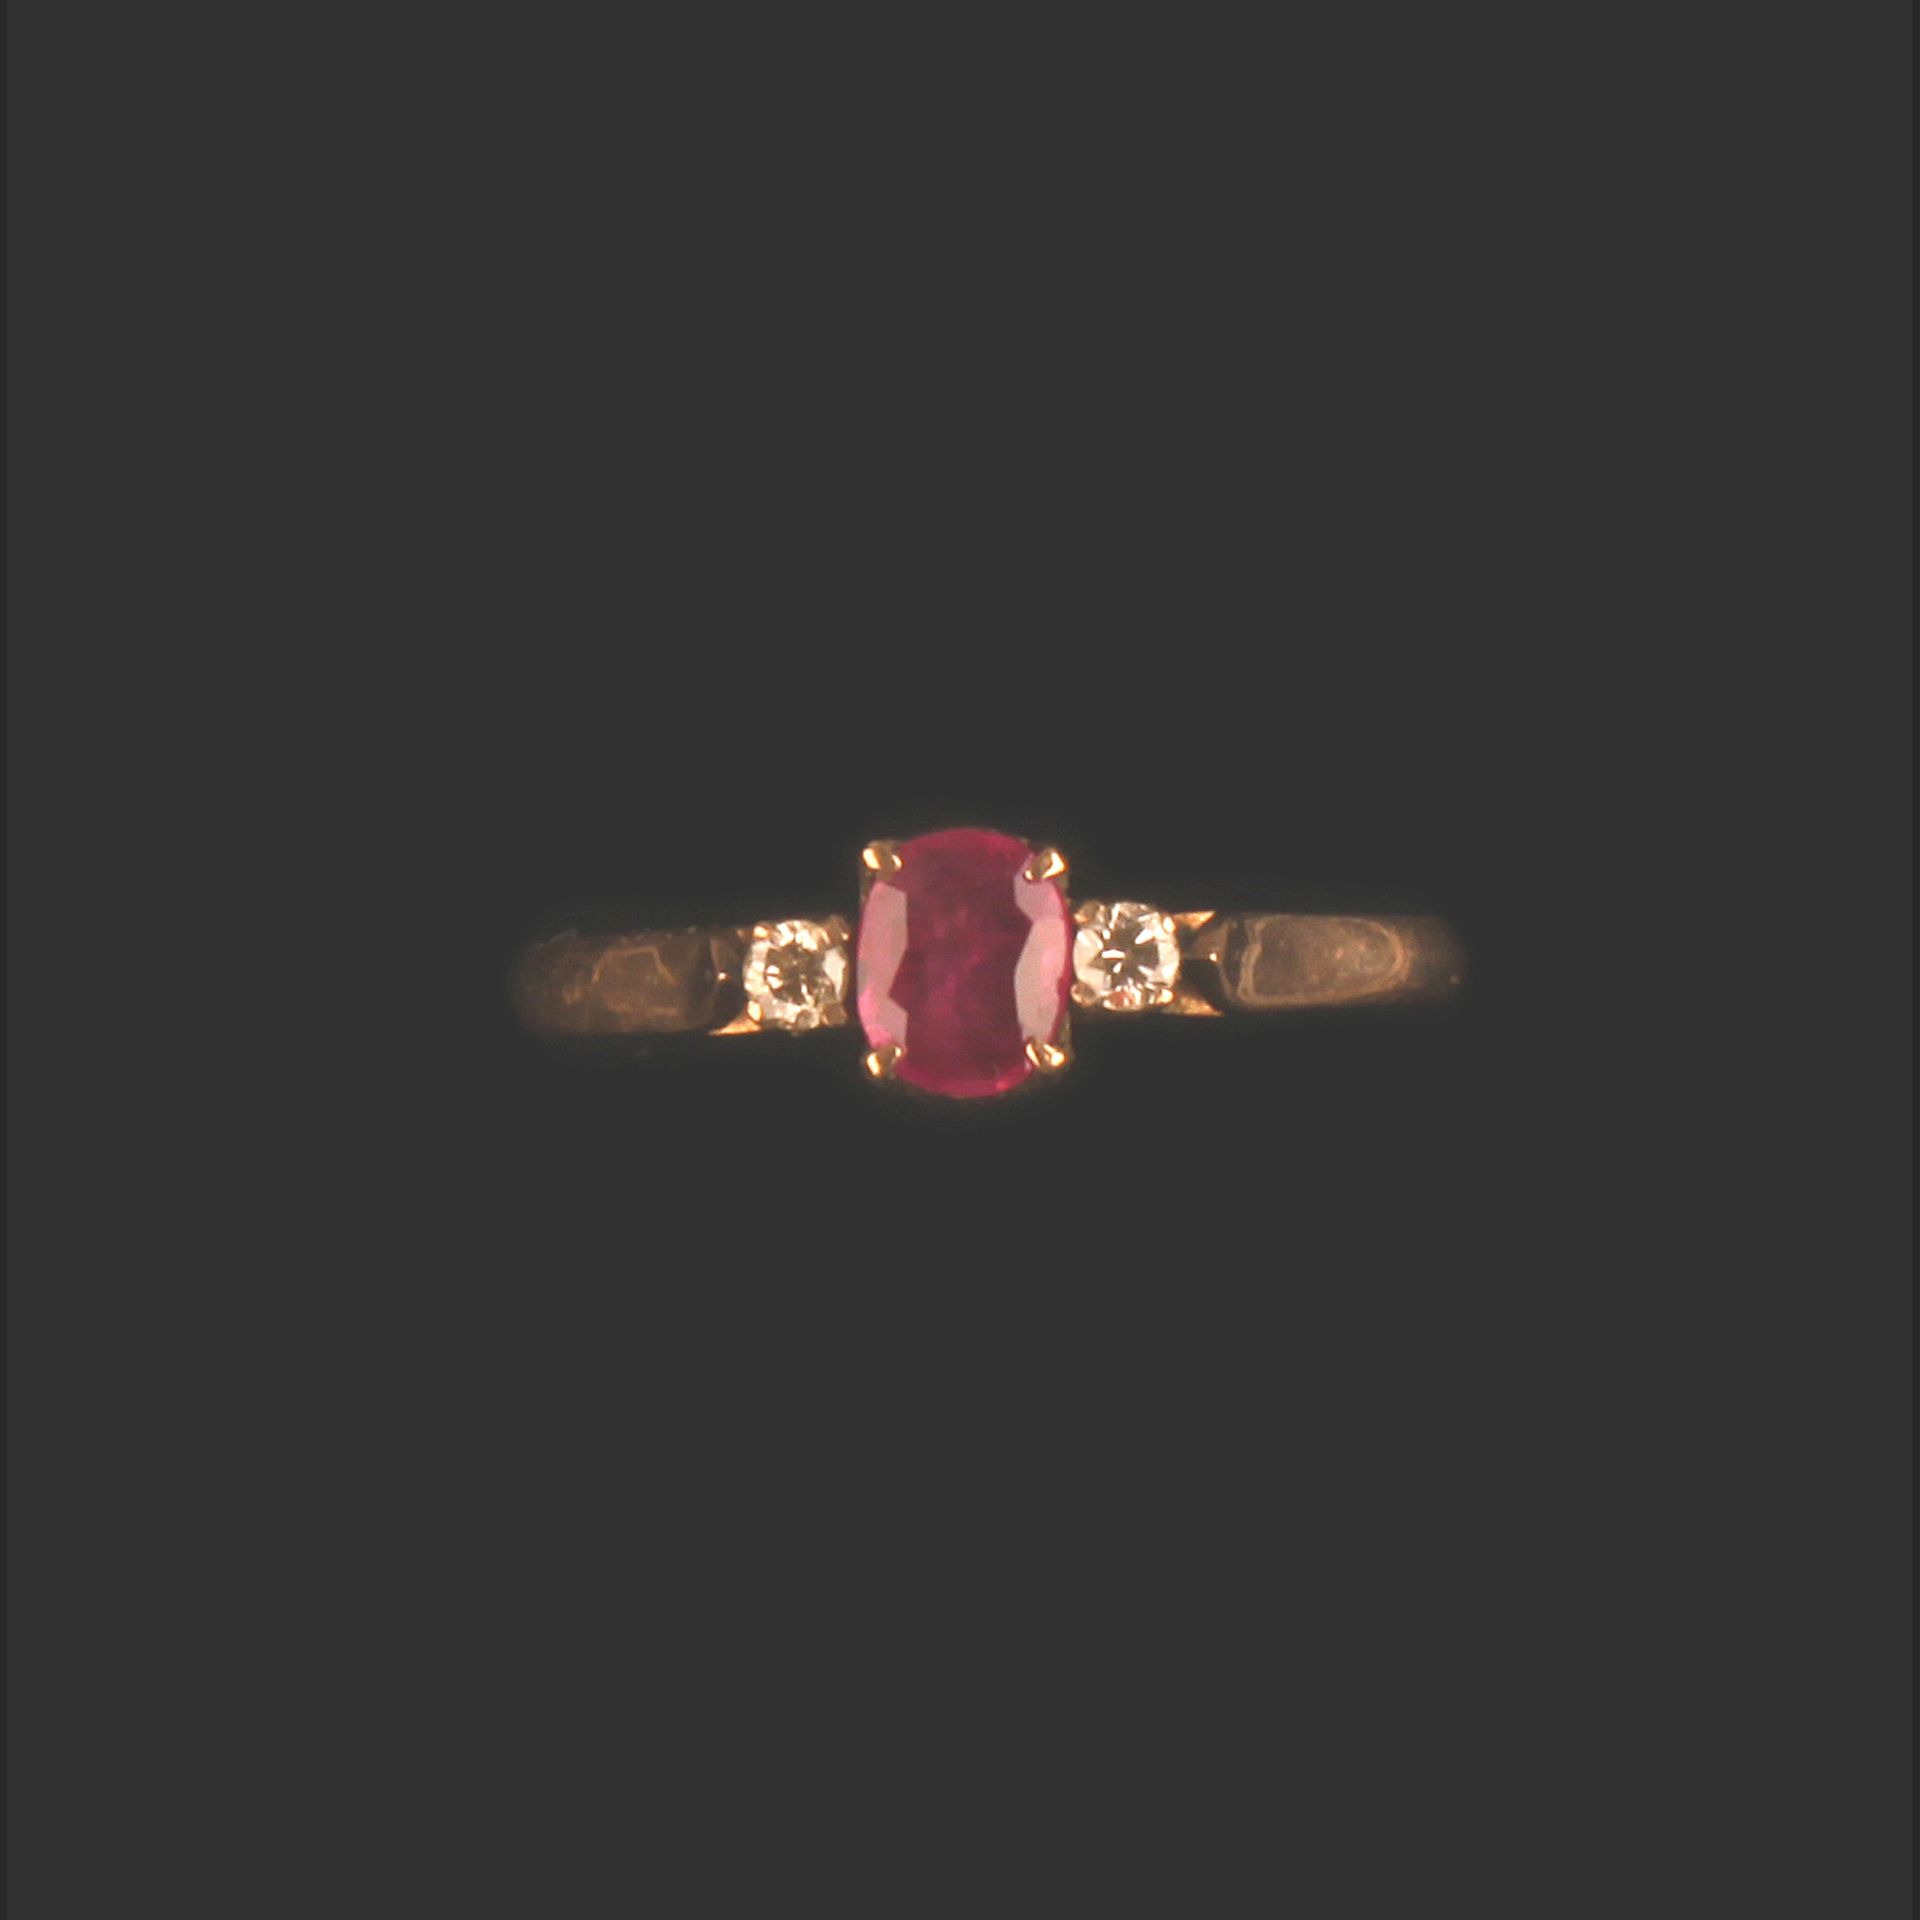 9ct GOLD RUBY & DIAMOND RING - Image 4 of 4